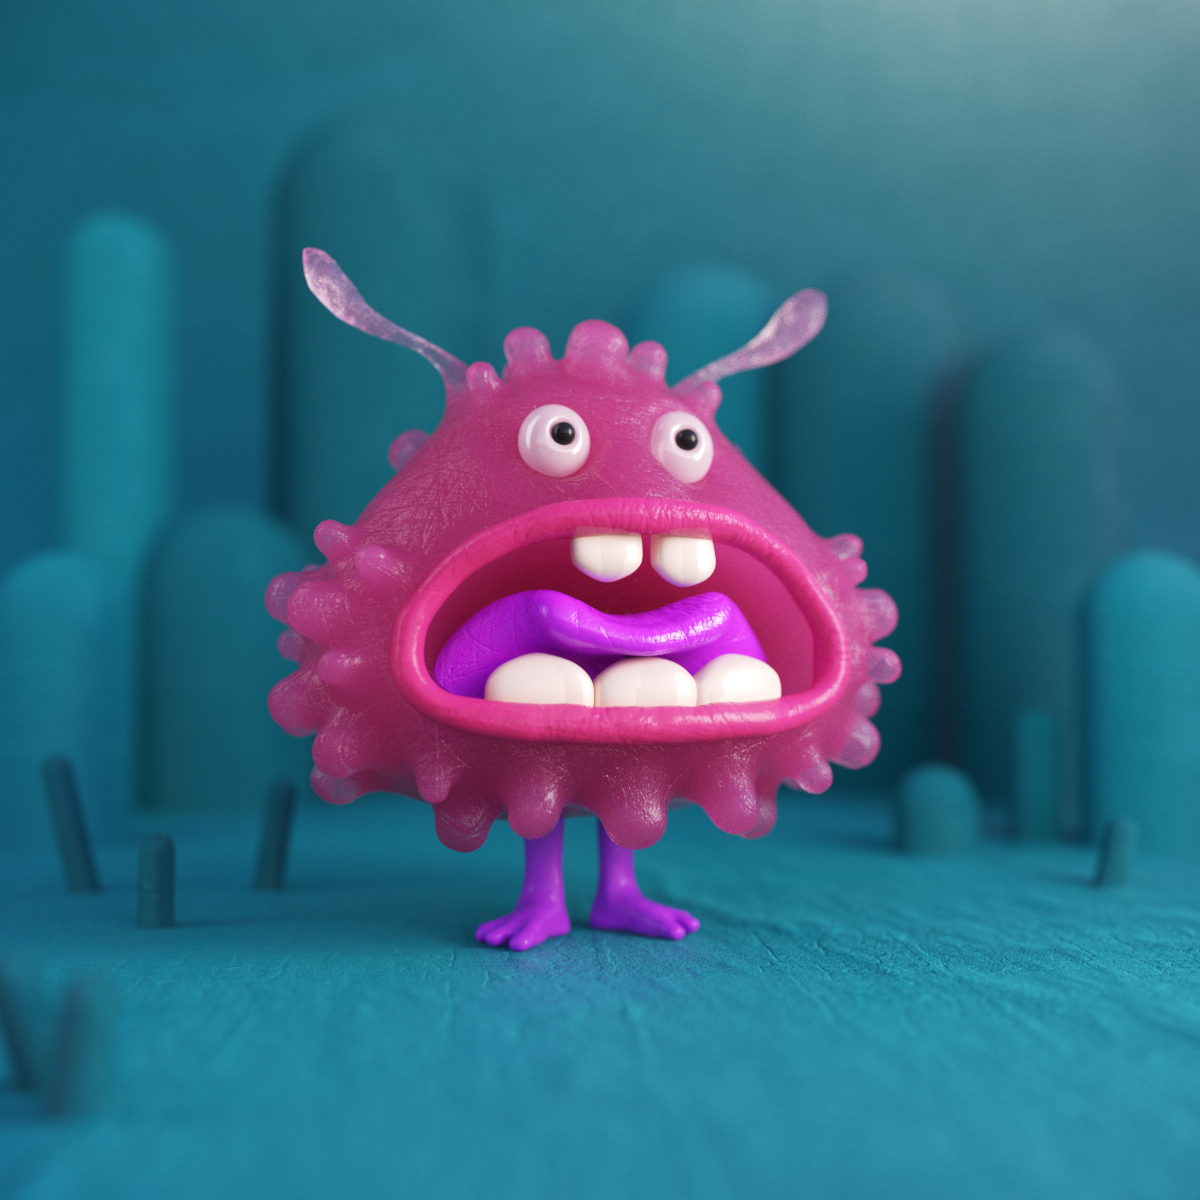 stupid friends cinema4d 3D Character c4d characterdesign monsters funny Zbrush